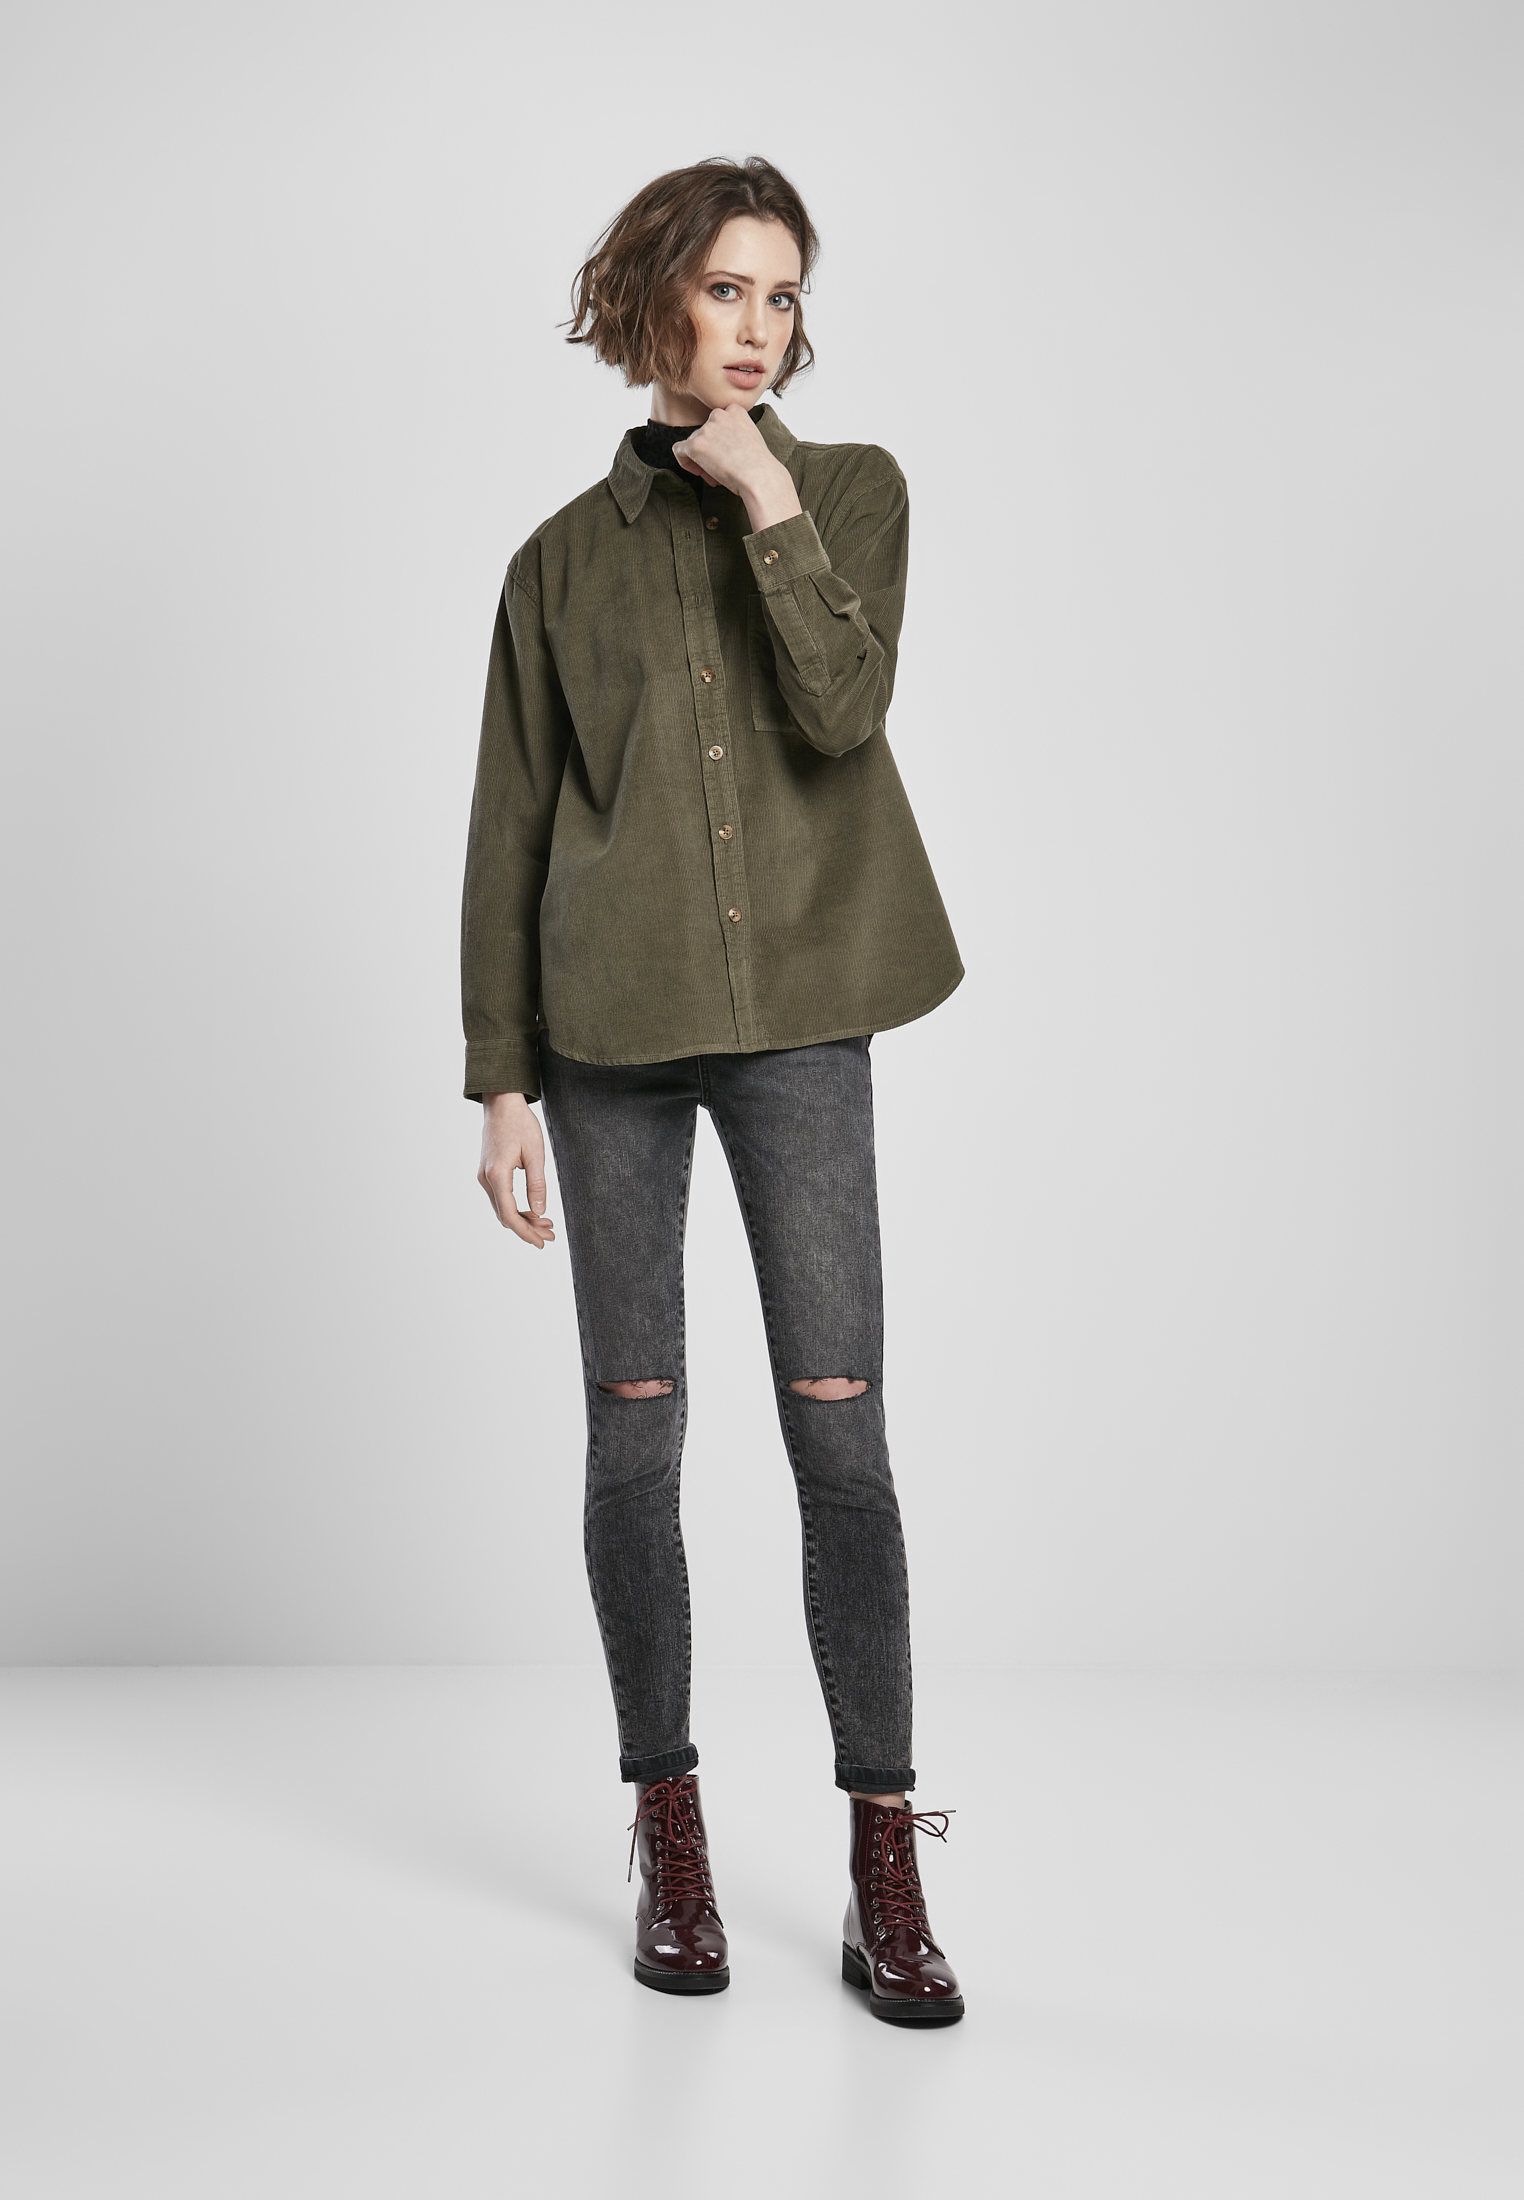 Curvy Ladies Corduroy Oversized Shirt in Farbe olive